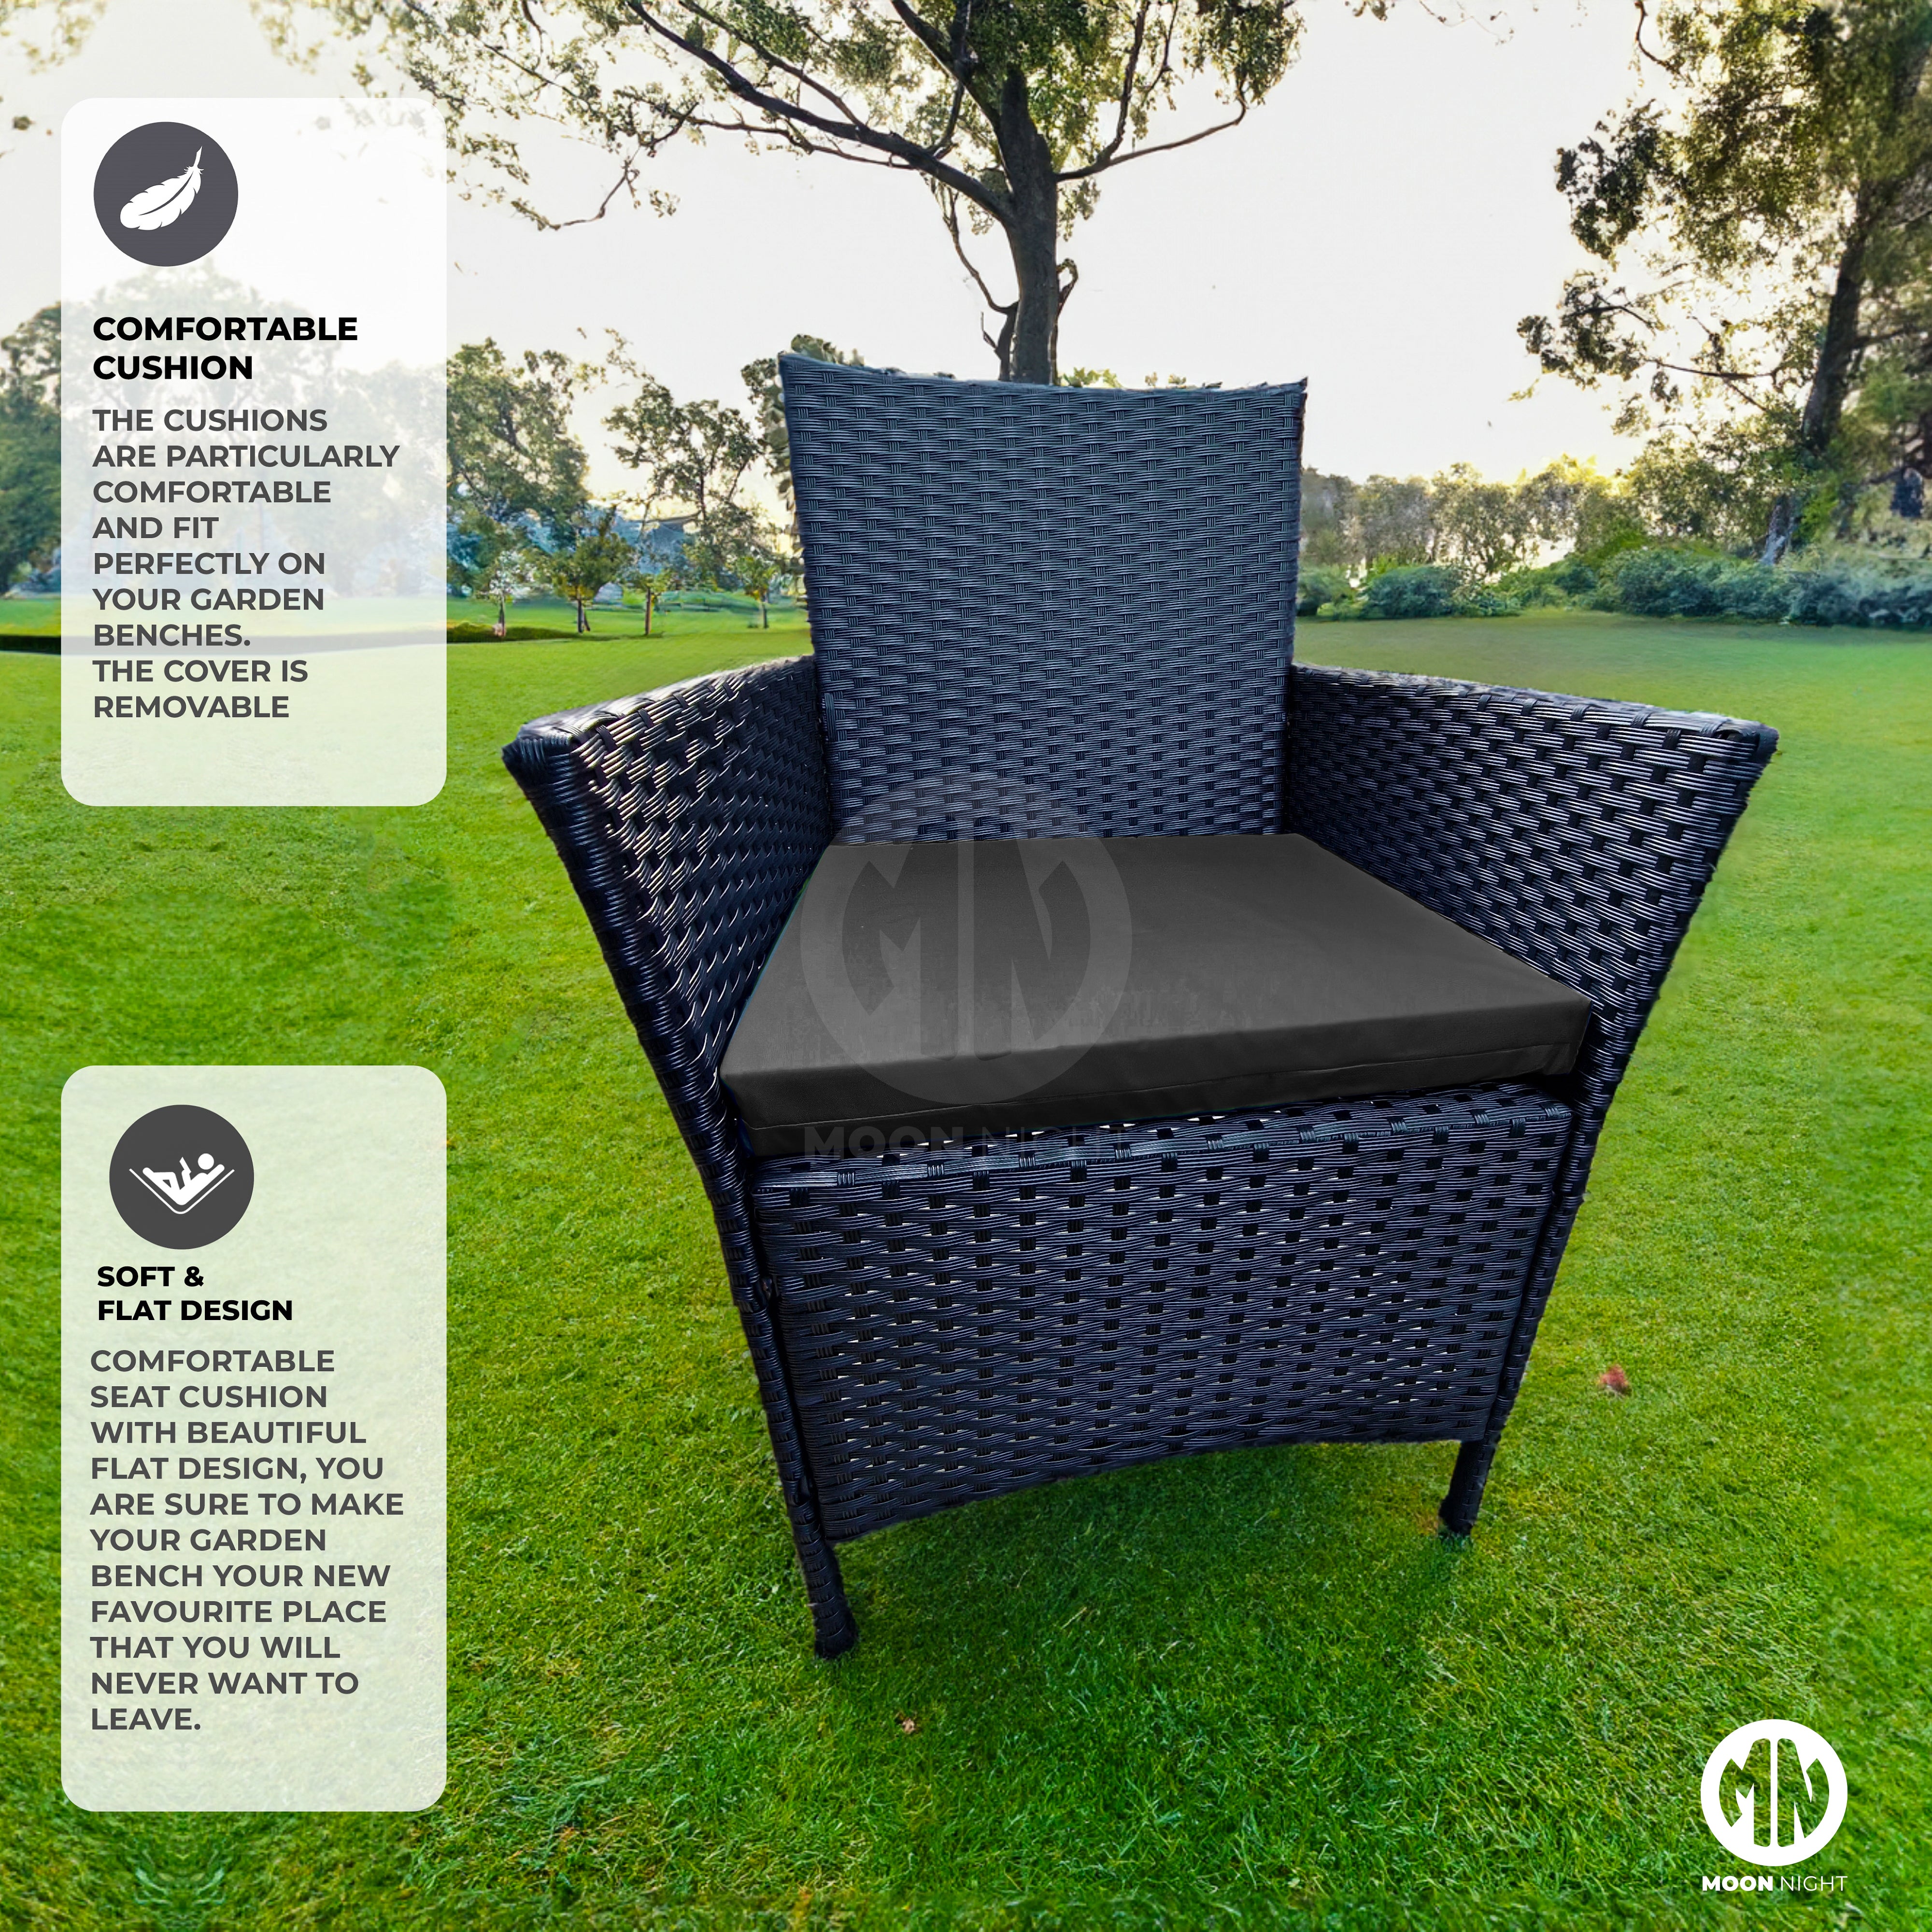 Moon Night® Replacement 3 pieces Rattan Chair Cushion Set Outdoor Garden Sofa Seat Pad [Made in UK]-Black